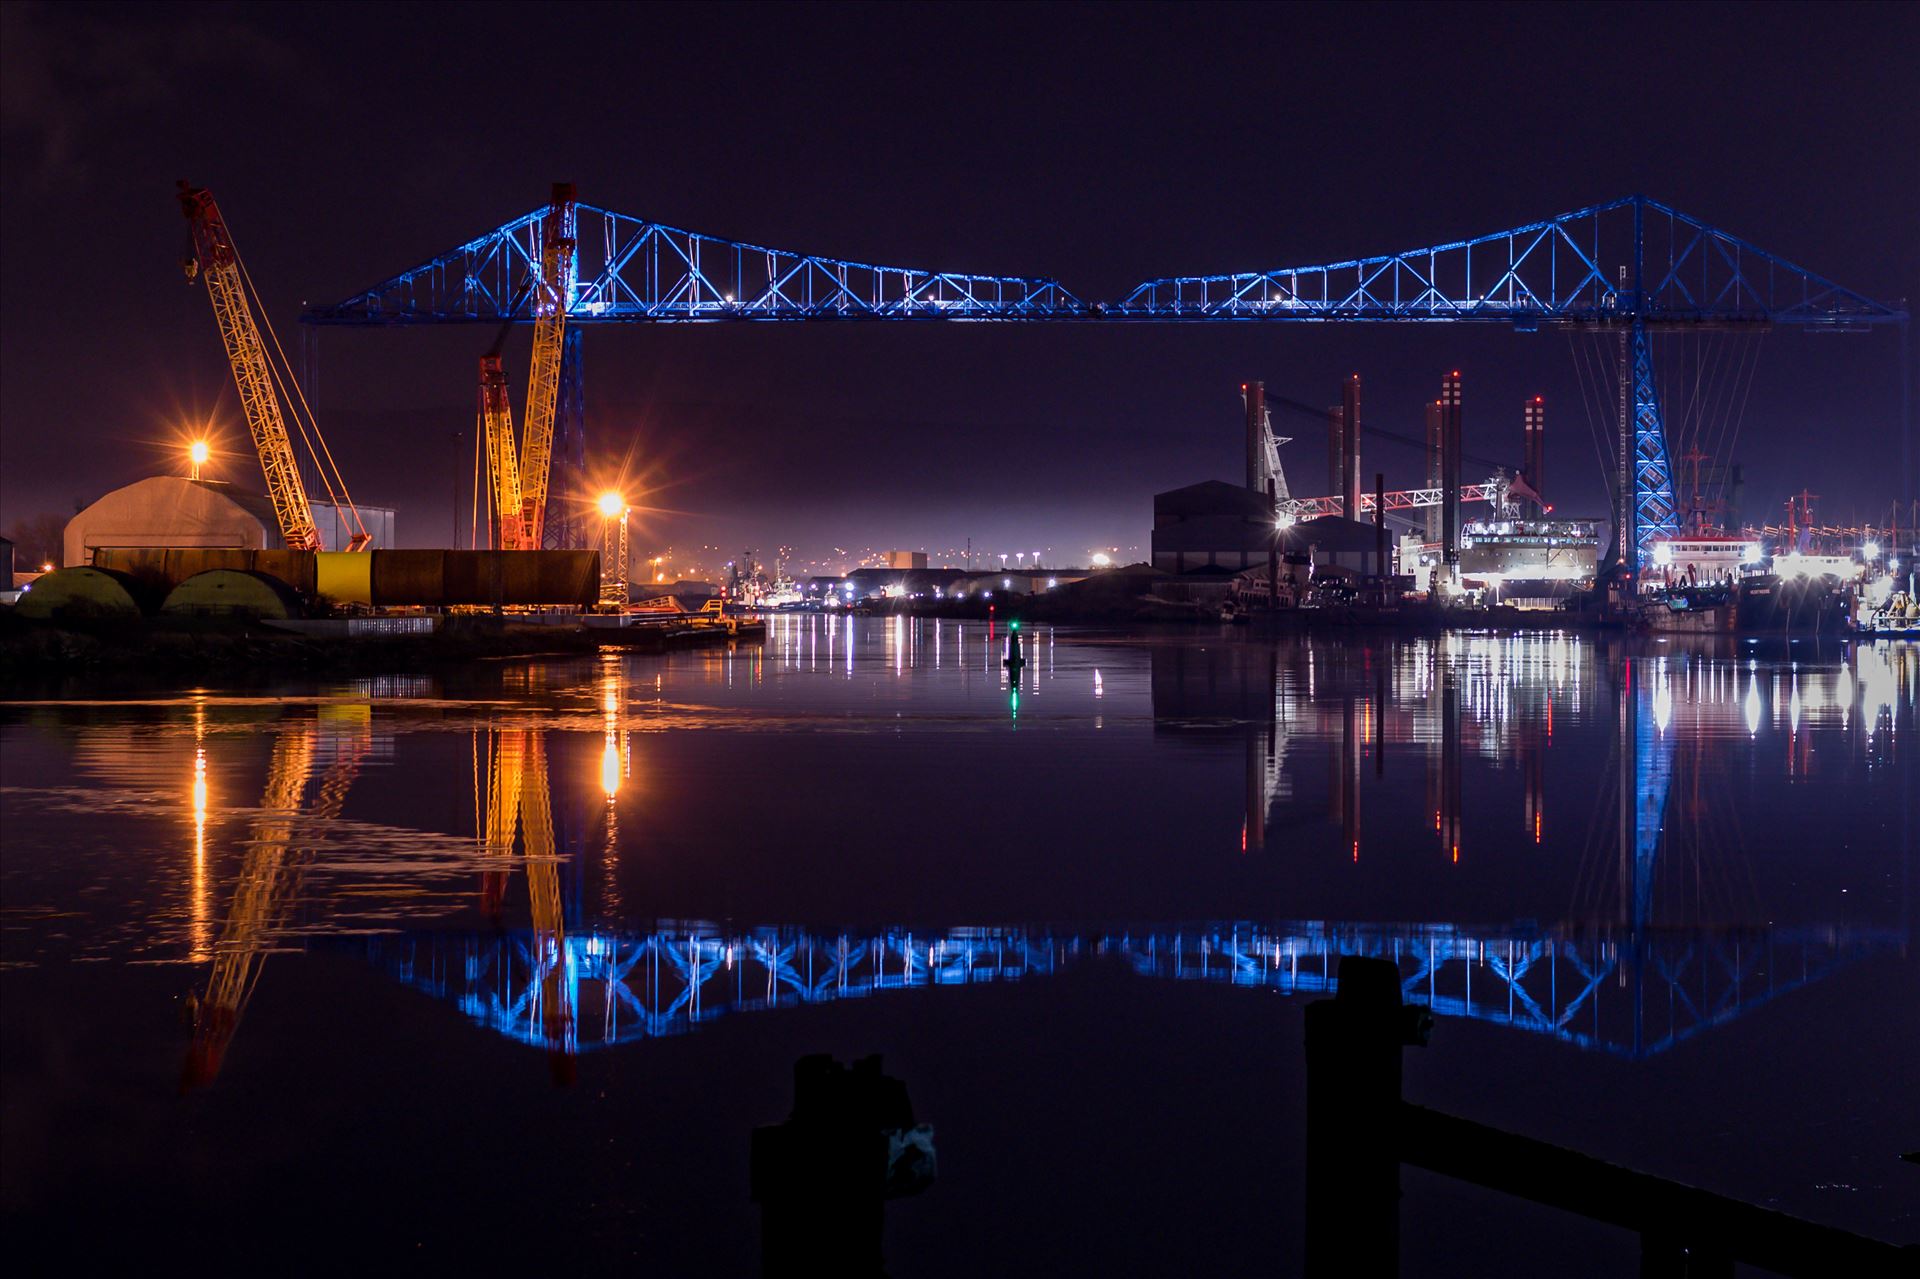 Transporter Bridge Reflections The Transporter Bridge Reflection. To buy this image or many more of this iconic bridge, follow the link
https://www.clickasnap.com/i/ozo4f31dpbldx6zo by AJ Stoves Photography